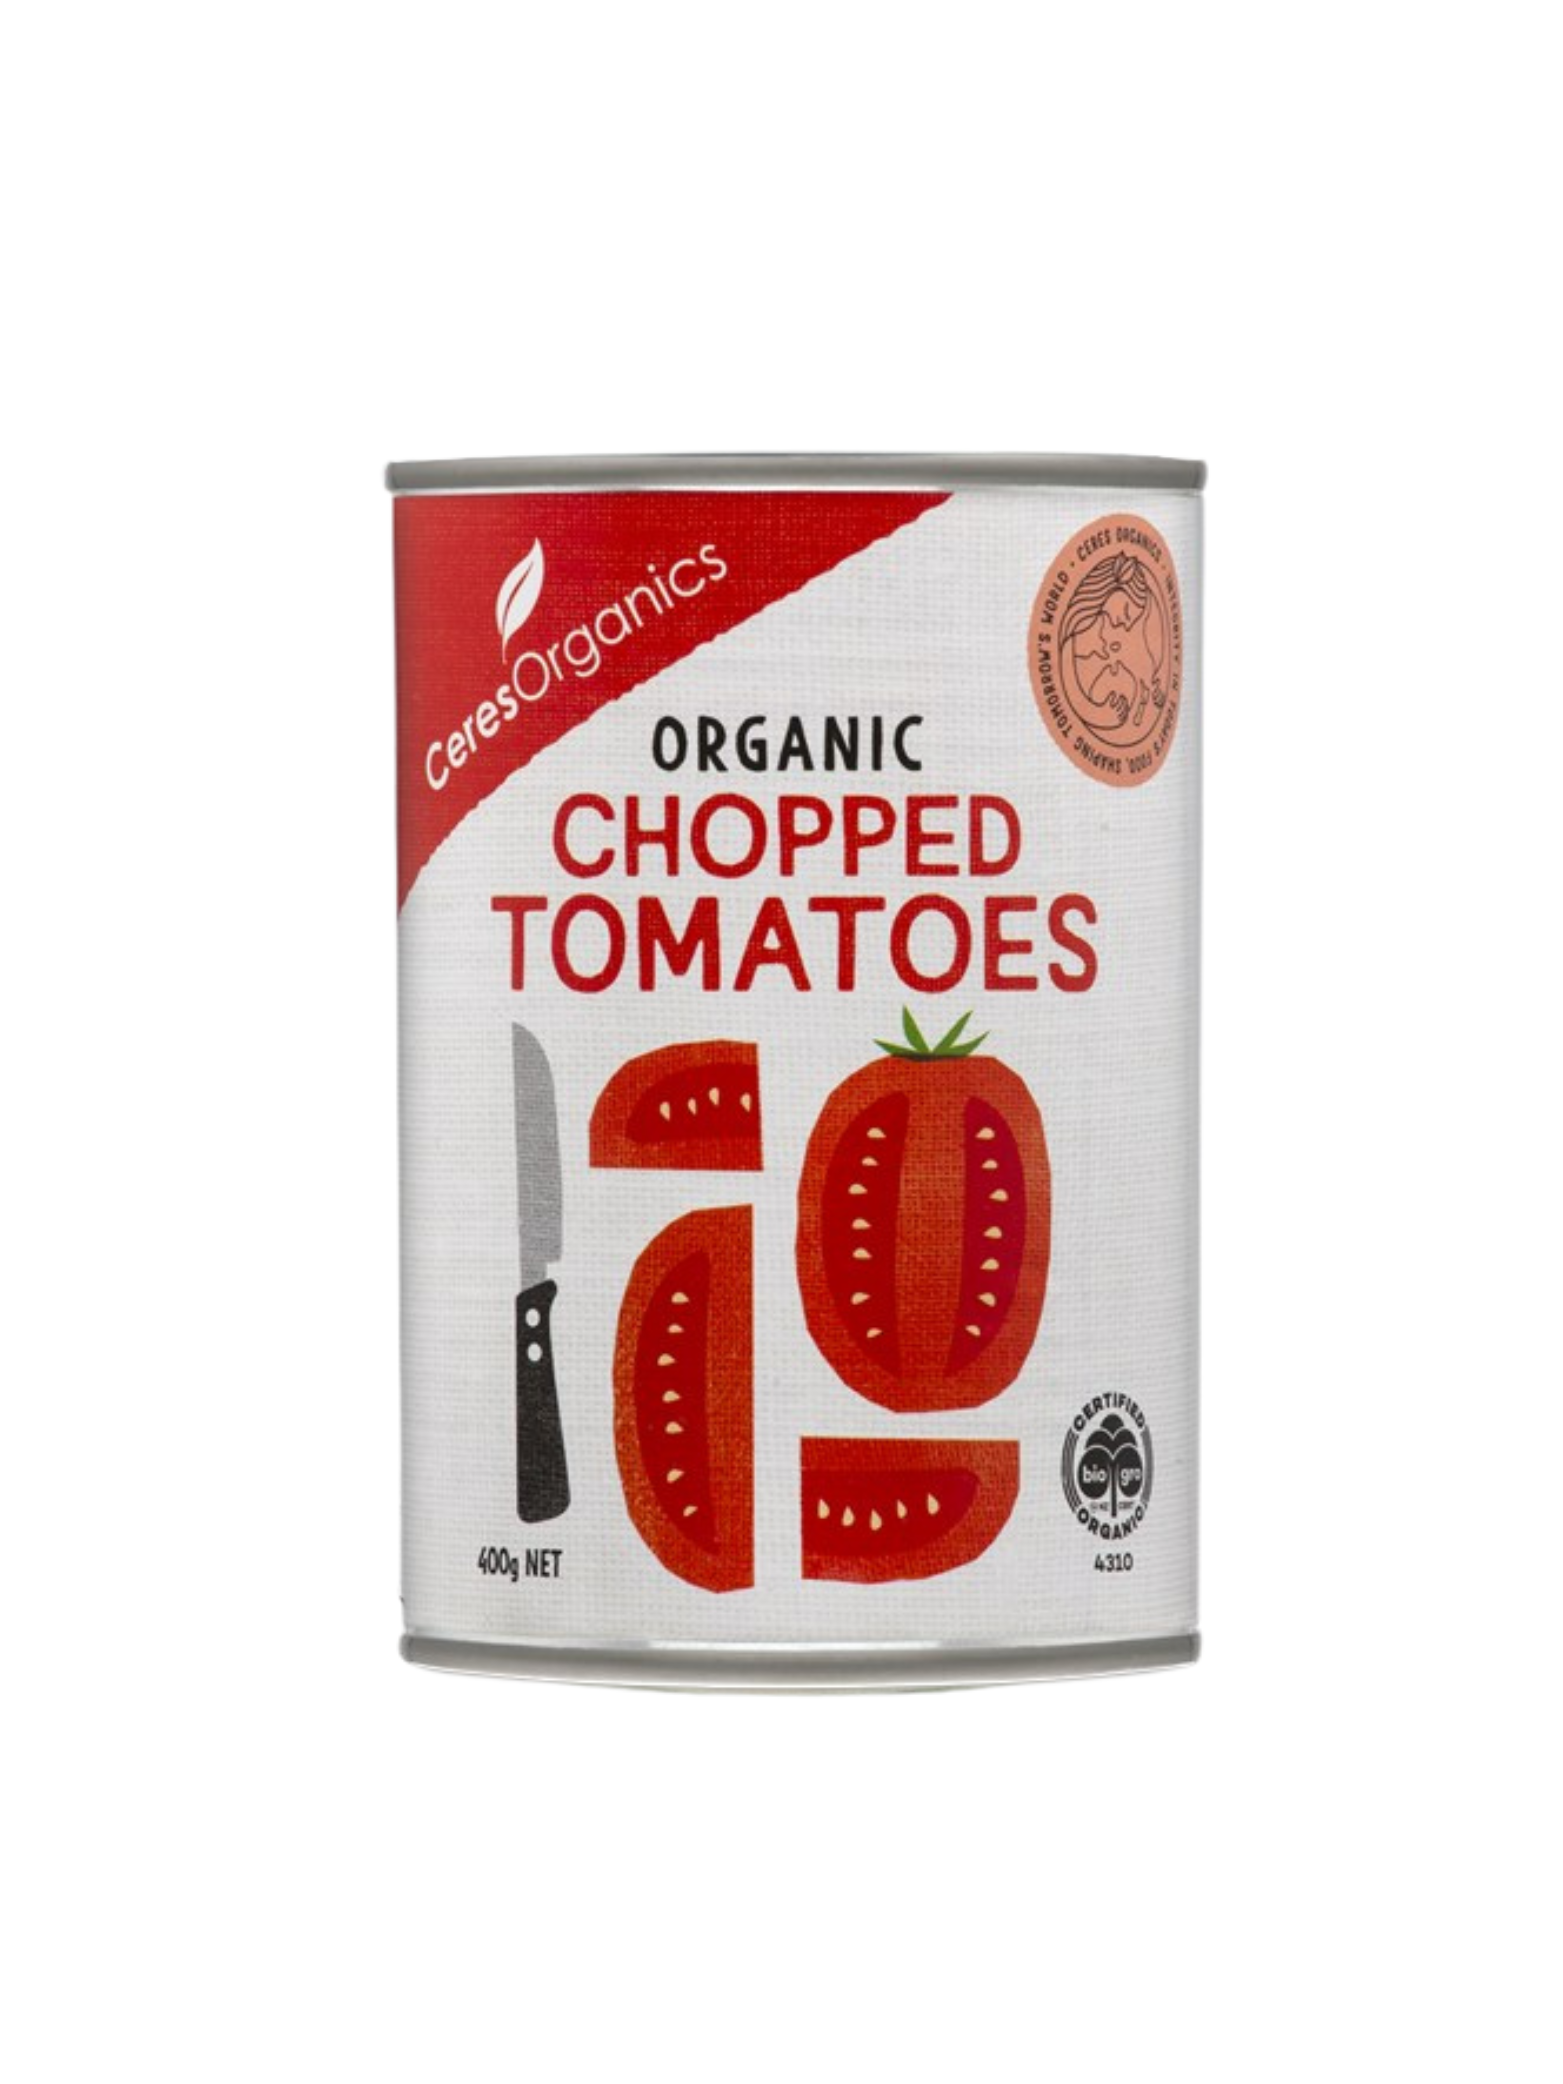 Organic Canned Tomatoes - Chopped